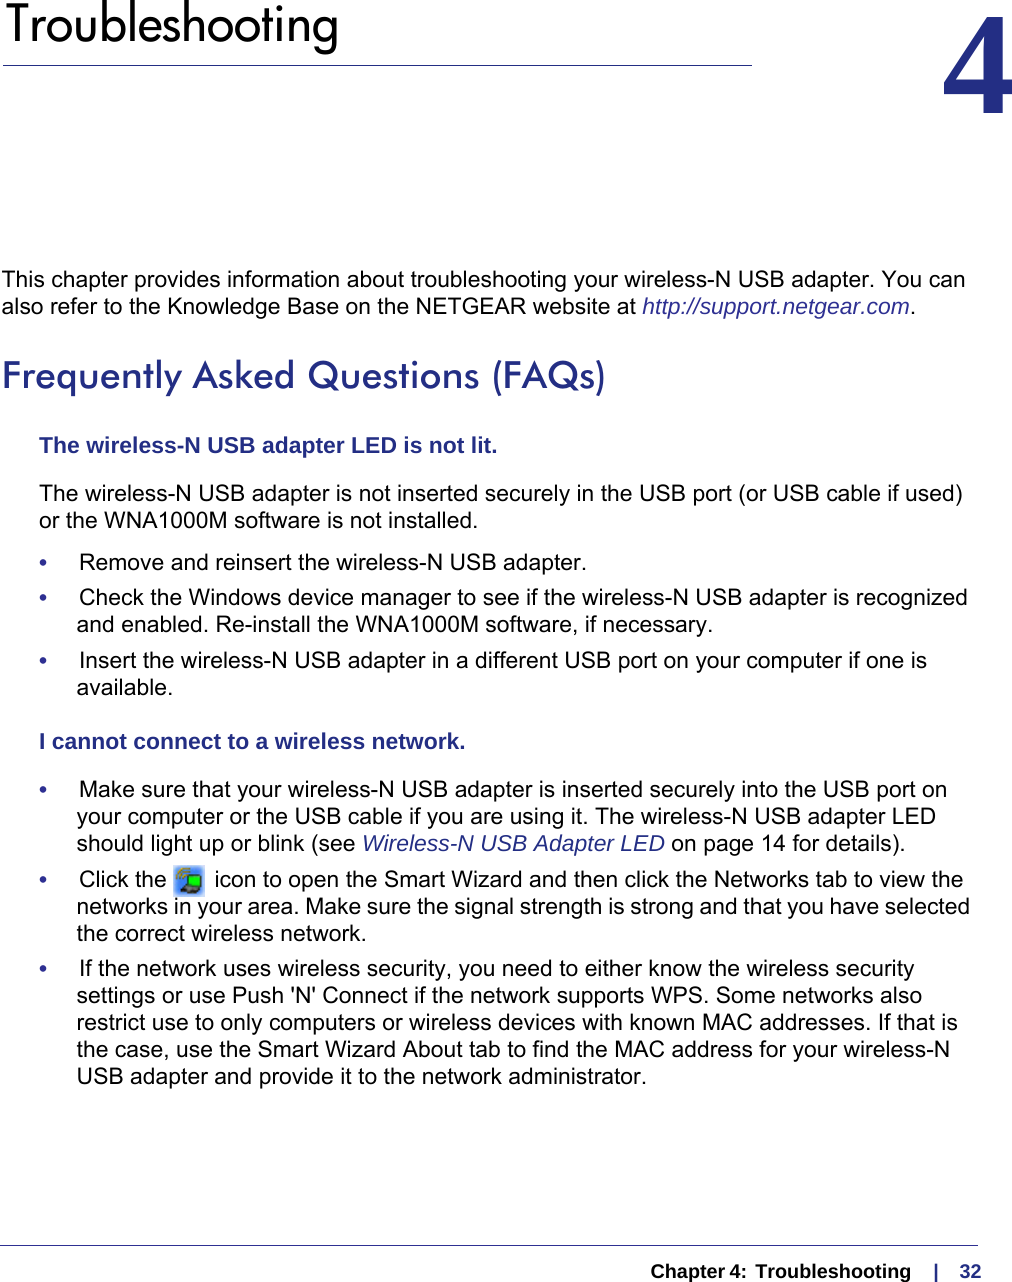   Chapter 4:  Troubleshooting     |    324.   Troubleshooting 4This chapter provides information about troubleshooting your wireless-N USB adapter. You can also refer to the Knowledge Base on the NETGEAR website at http://support.netgear.com.Frequently Asked Questions (FAQs)The wireless-N USB adapter LED is not lit.The wireless-N USB adapter is not inserted securely in the USB port (or USB cable if used) or the WNA1000M software is not installed. •     Remove and reinsert the wireless-N USB adapter.•     Check the Windows device manager to see if the wireless-N USB adapter is recognized and enabled. Re-install the WNA1000M software, if necessary.•     Insert the wireless-N USB adapter in a different USB port on your computer if one is available.I cannot connect to a wireless network. •     Make sure that your wireless-N USB adapter is inserted securely into the USB port on your computer or the USB cable if you are using it. The wireless-N USB adapter LED should light up or blink (see Wireless-N USB Adapter LED on page  14 for details).•     Click the   icon to open the Smart Wizard and then click the Networks tab to view the networks in your area. Make sure the signal strength is strong and that you have selected the correct wireless network.•     If the network uses wireless security, you need to either know the wireless security settings or use Push &apos;N&apos; Connect if the network supports WPS. Some networks also restrict use to only computers or wireless devices with known MAC addresses. If that is the case, use the Smart Wizard About tab to find the MAC address for your wireless-N USB adapter and provide it to the network administrator.